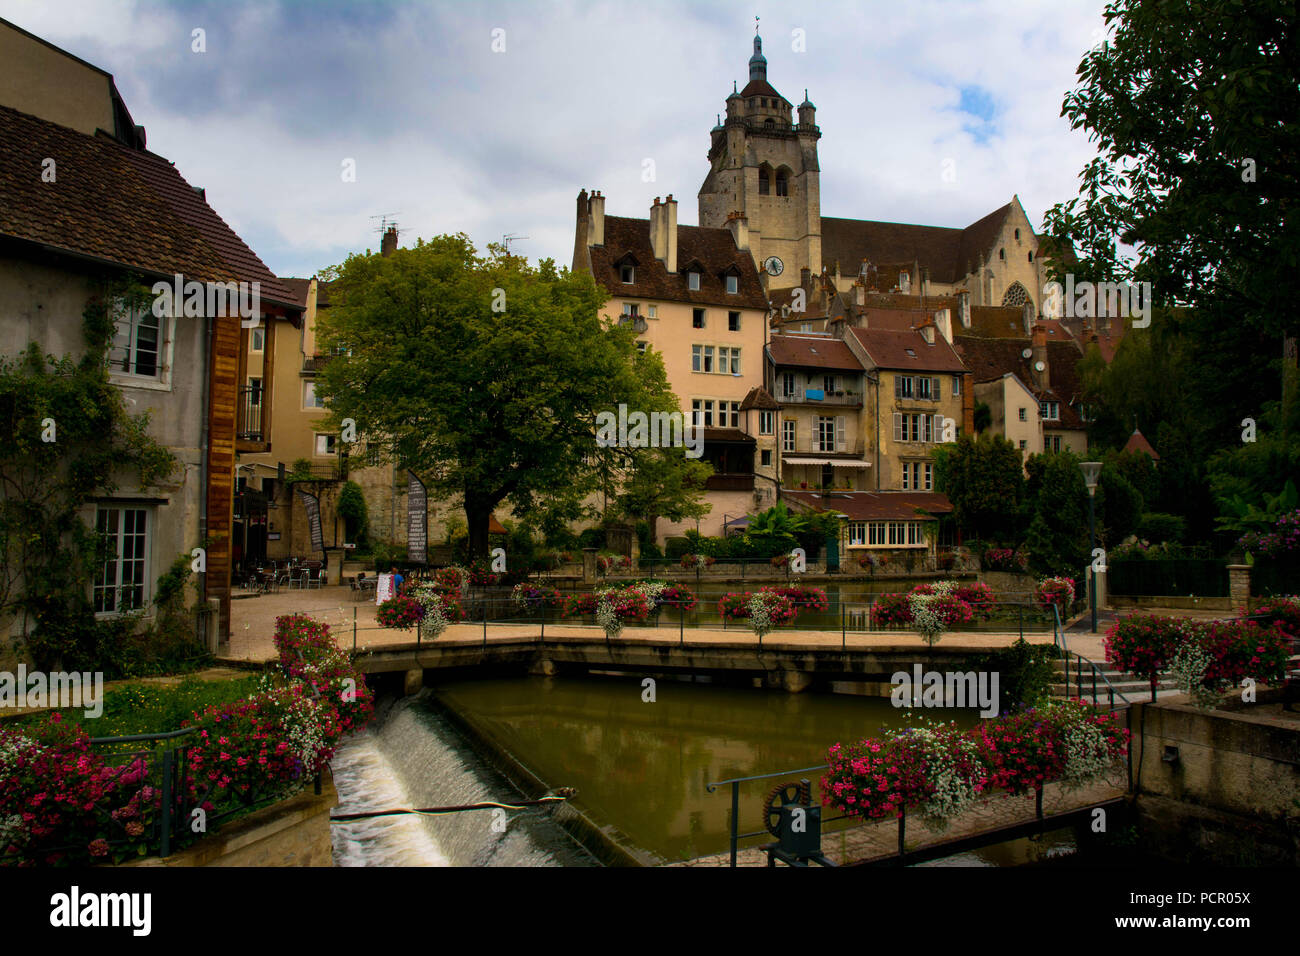 City of Dole in the Franche Comté region in France Stock Photo